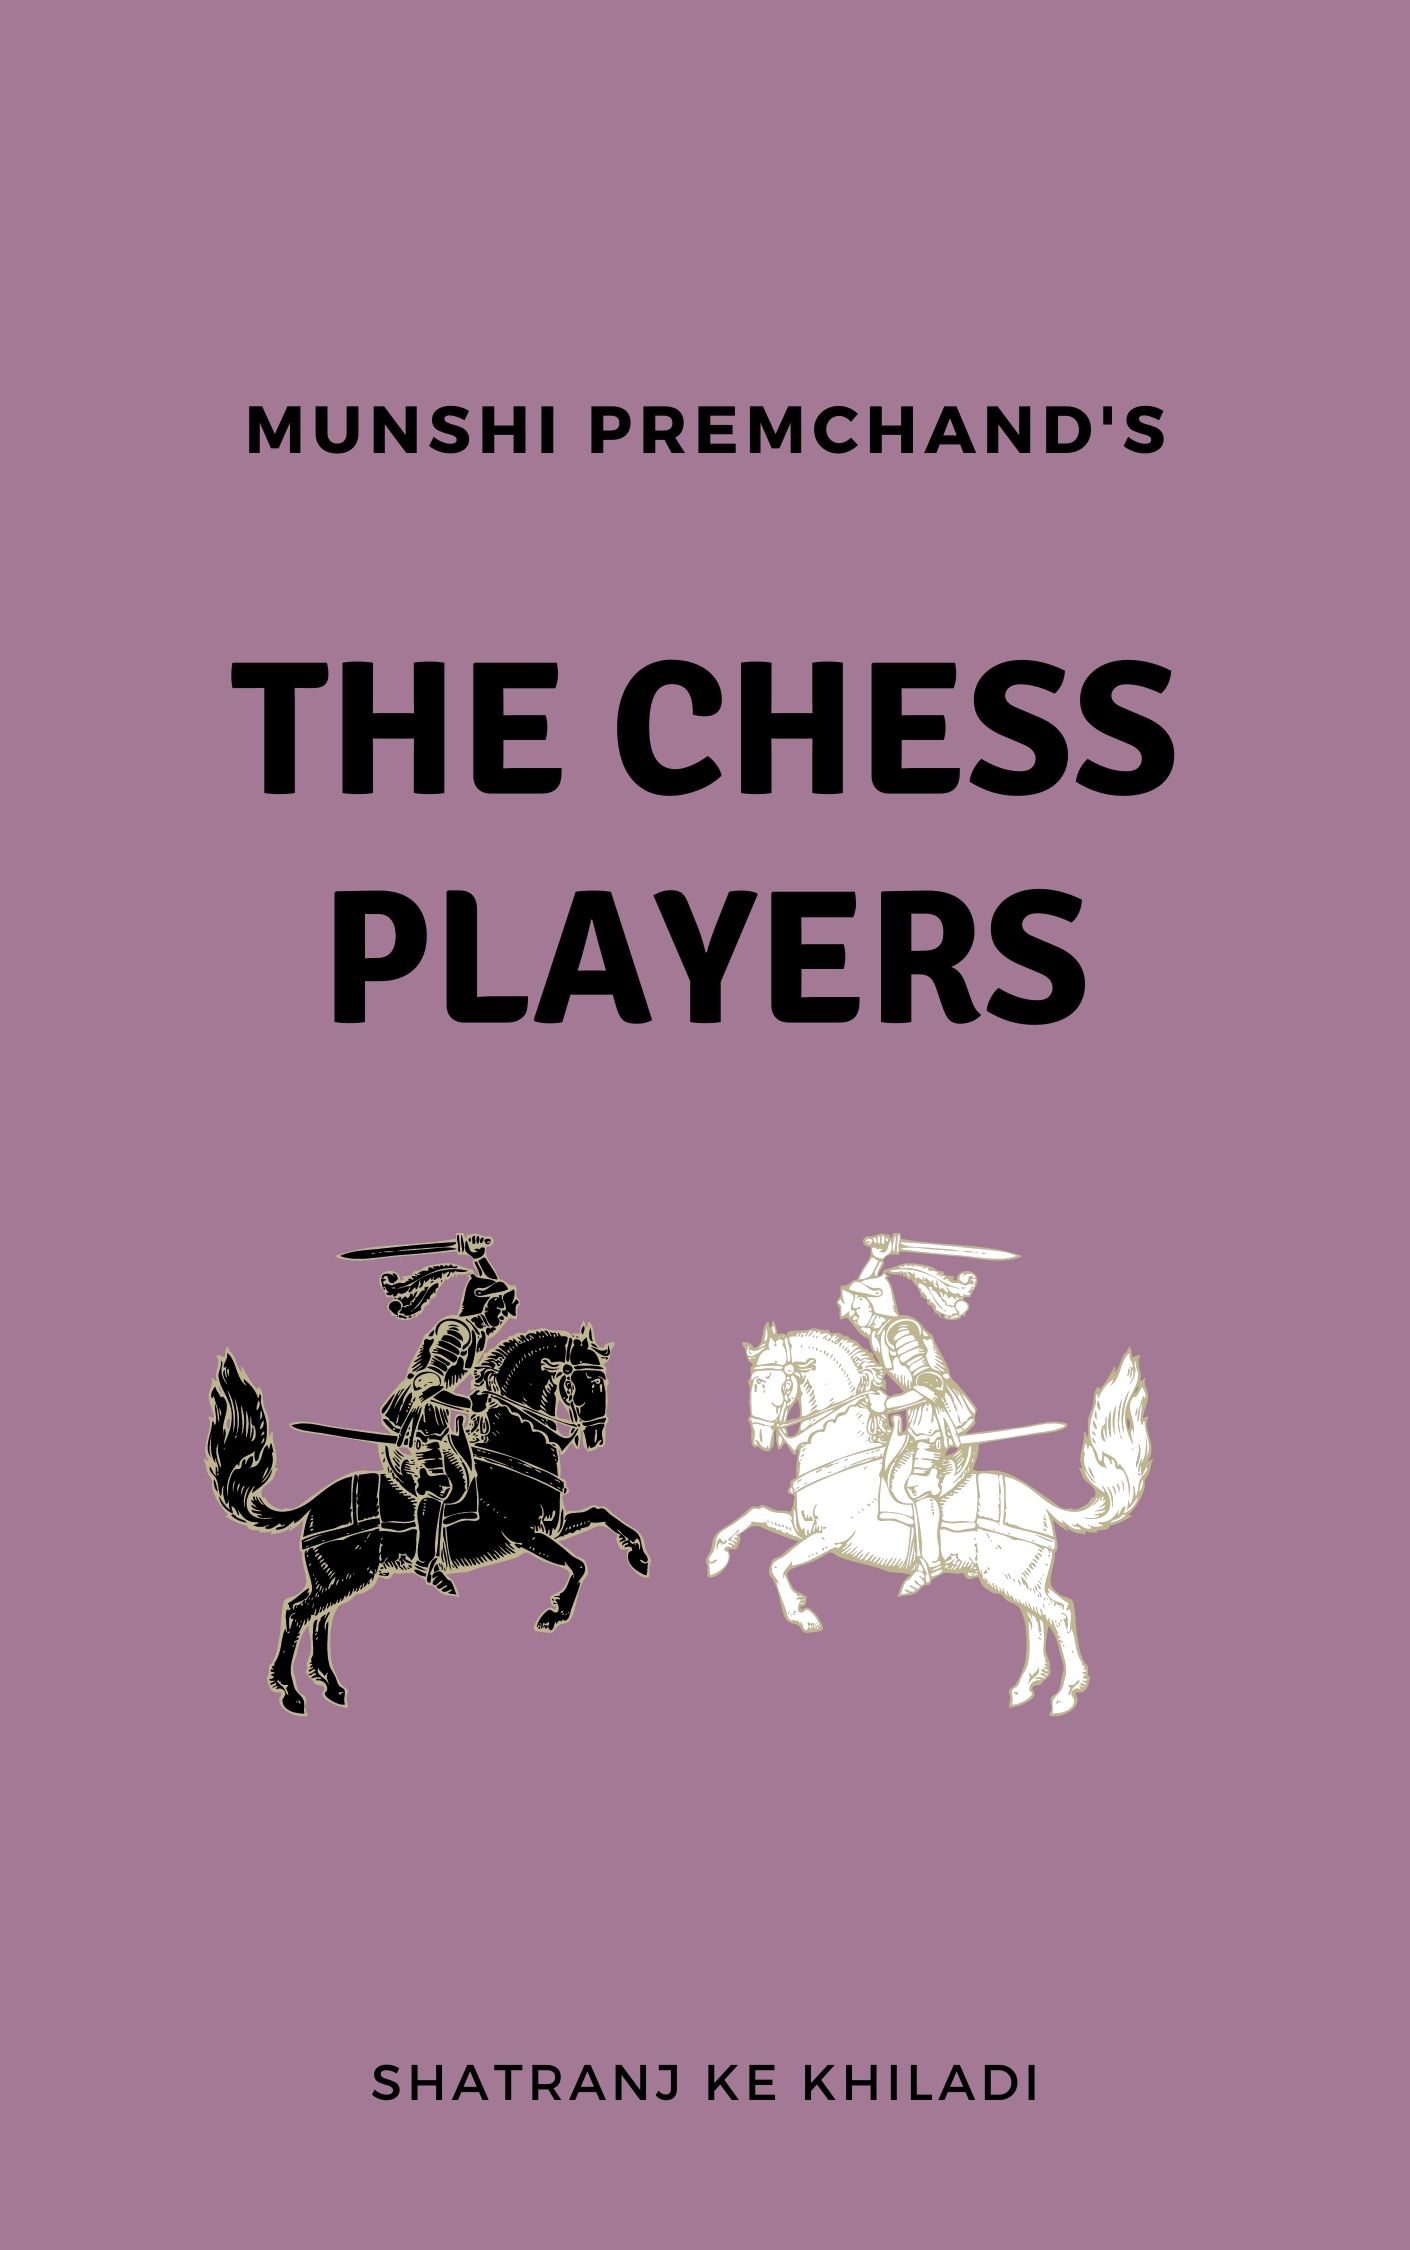 The Chess Players by Munshi Premchand